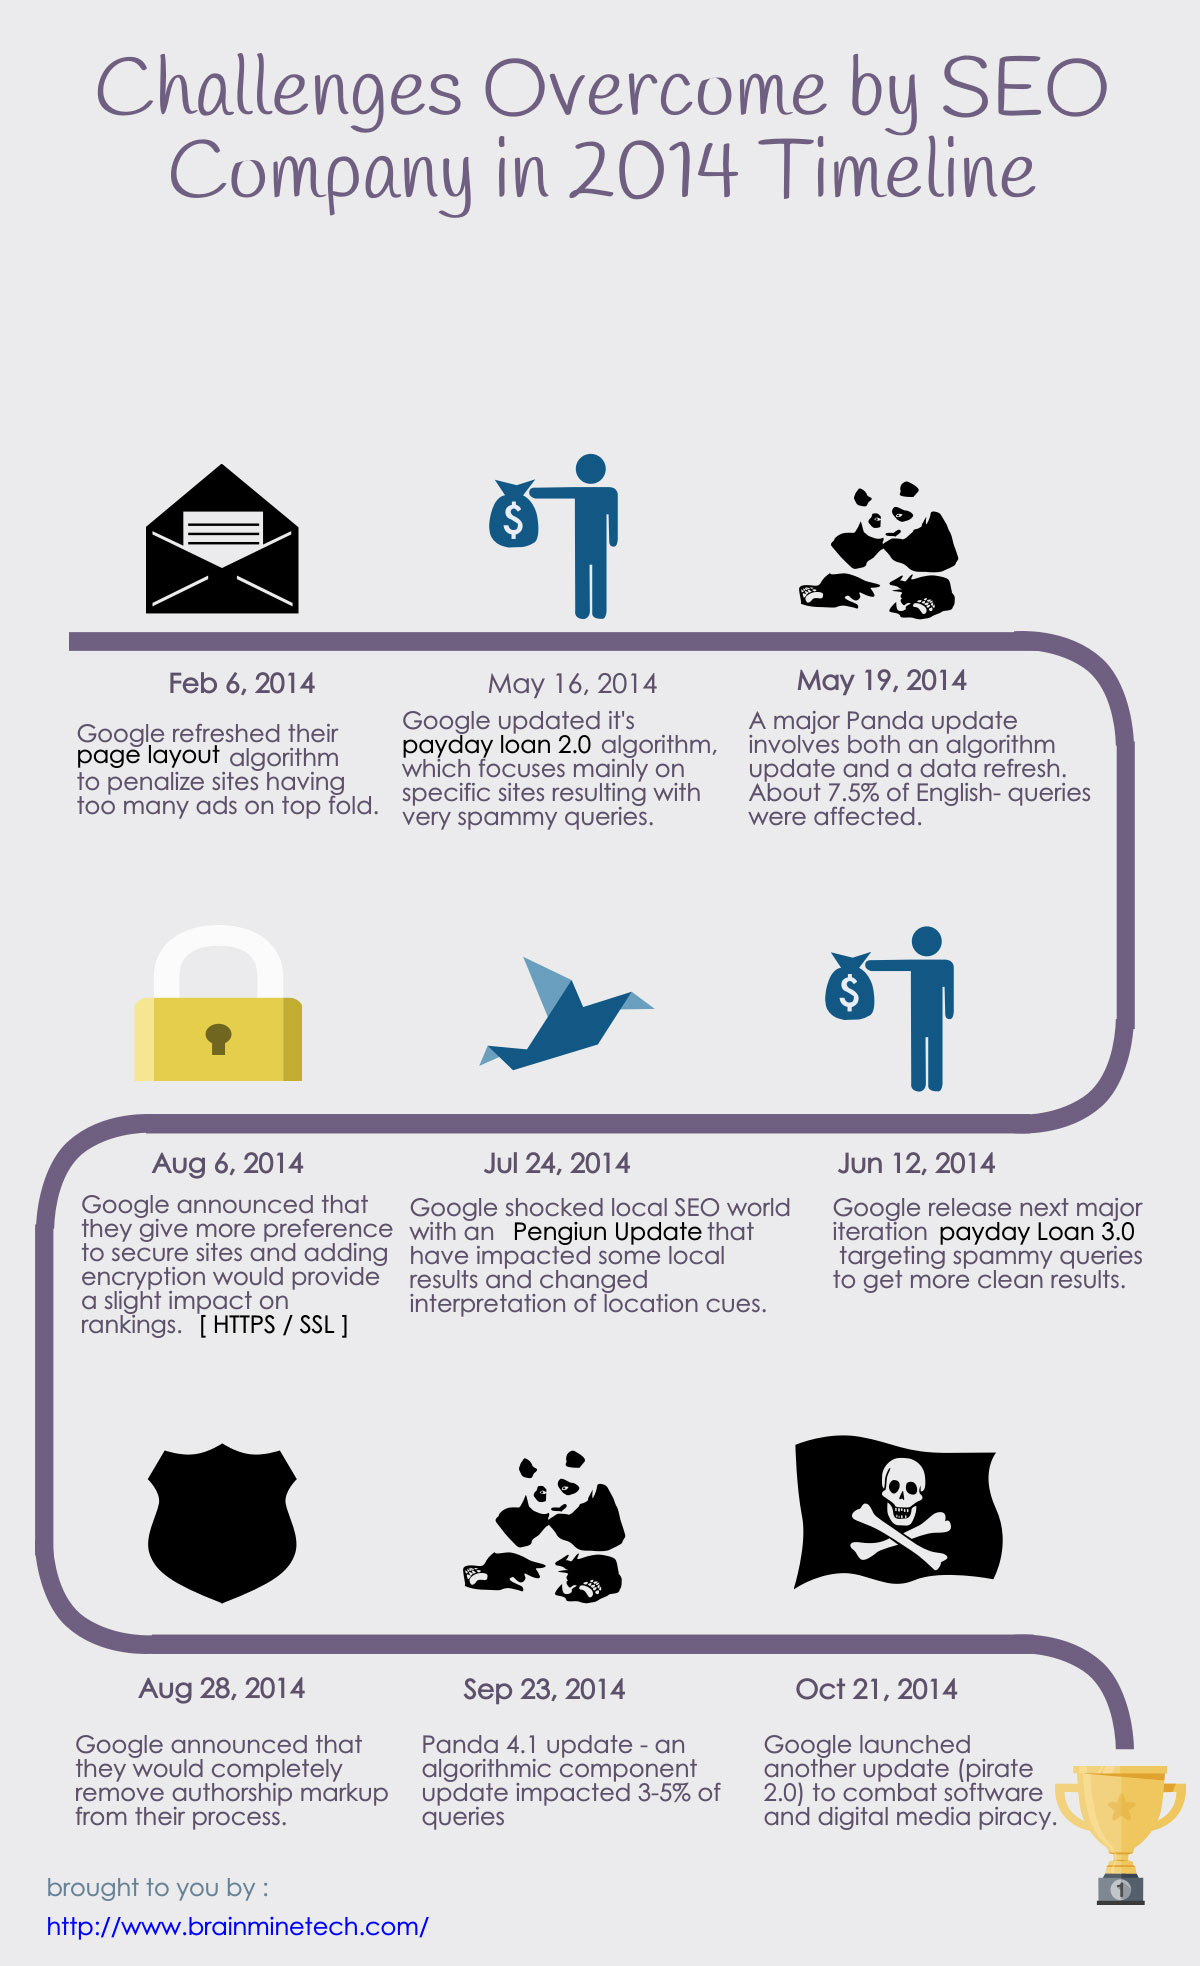 Challenges Overcome by SEO Company in 2014 Timeline